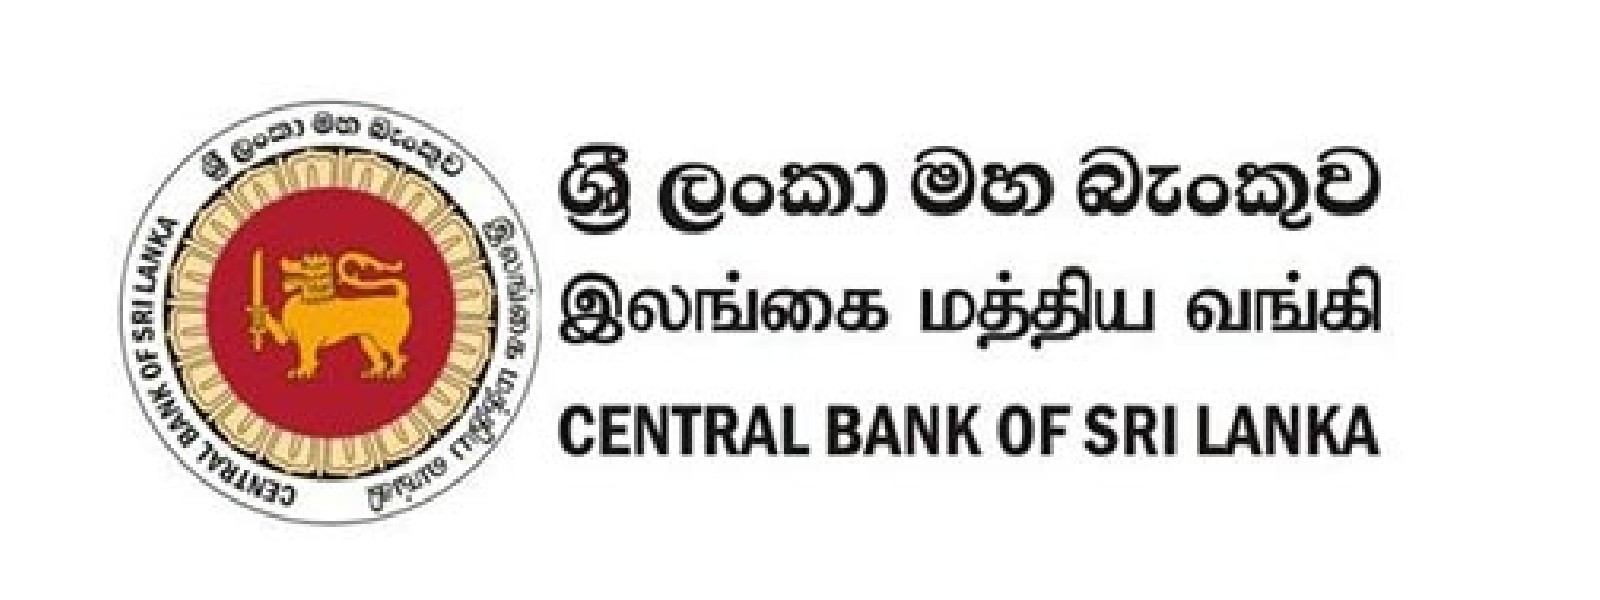 Sri Lanka’s Central Bank seeks foreign currency donations